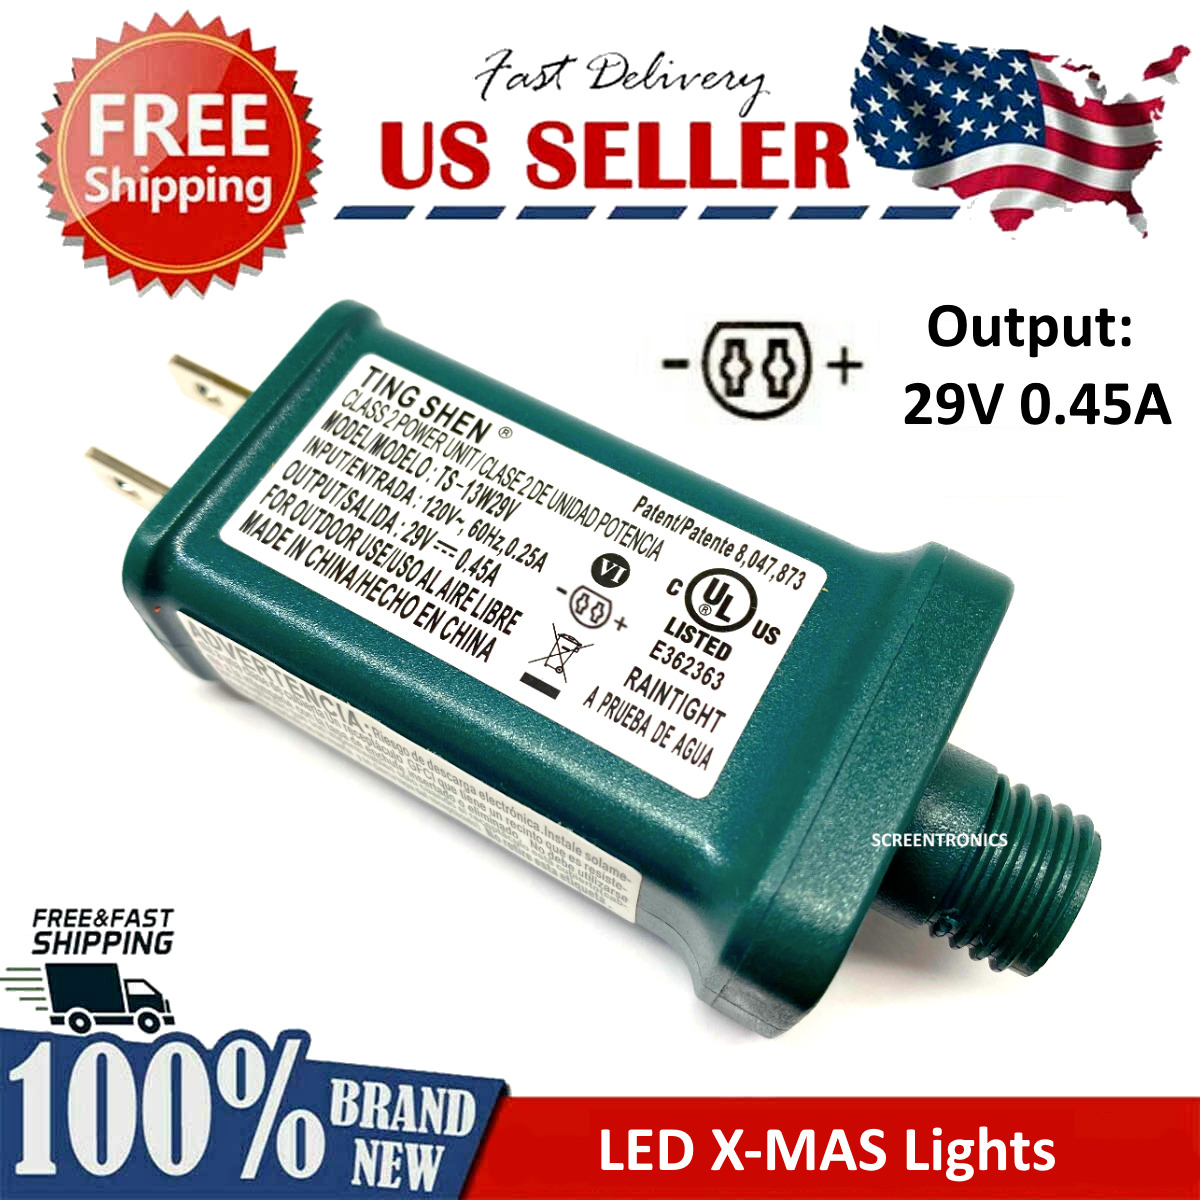 Replacement Power Supply for LED Xmas Tree Lights DC 29V 0.45A - TS-LU13W